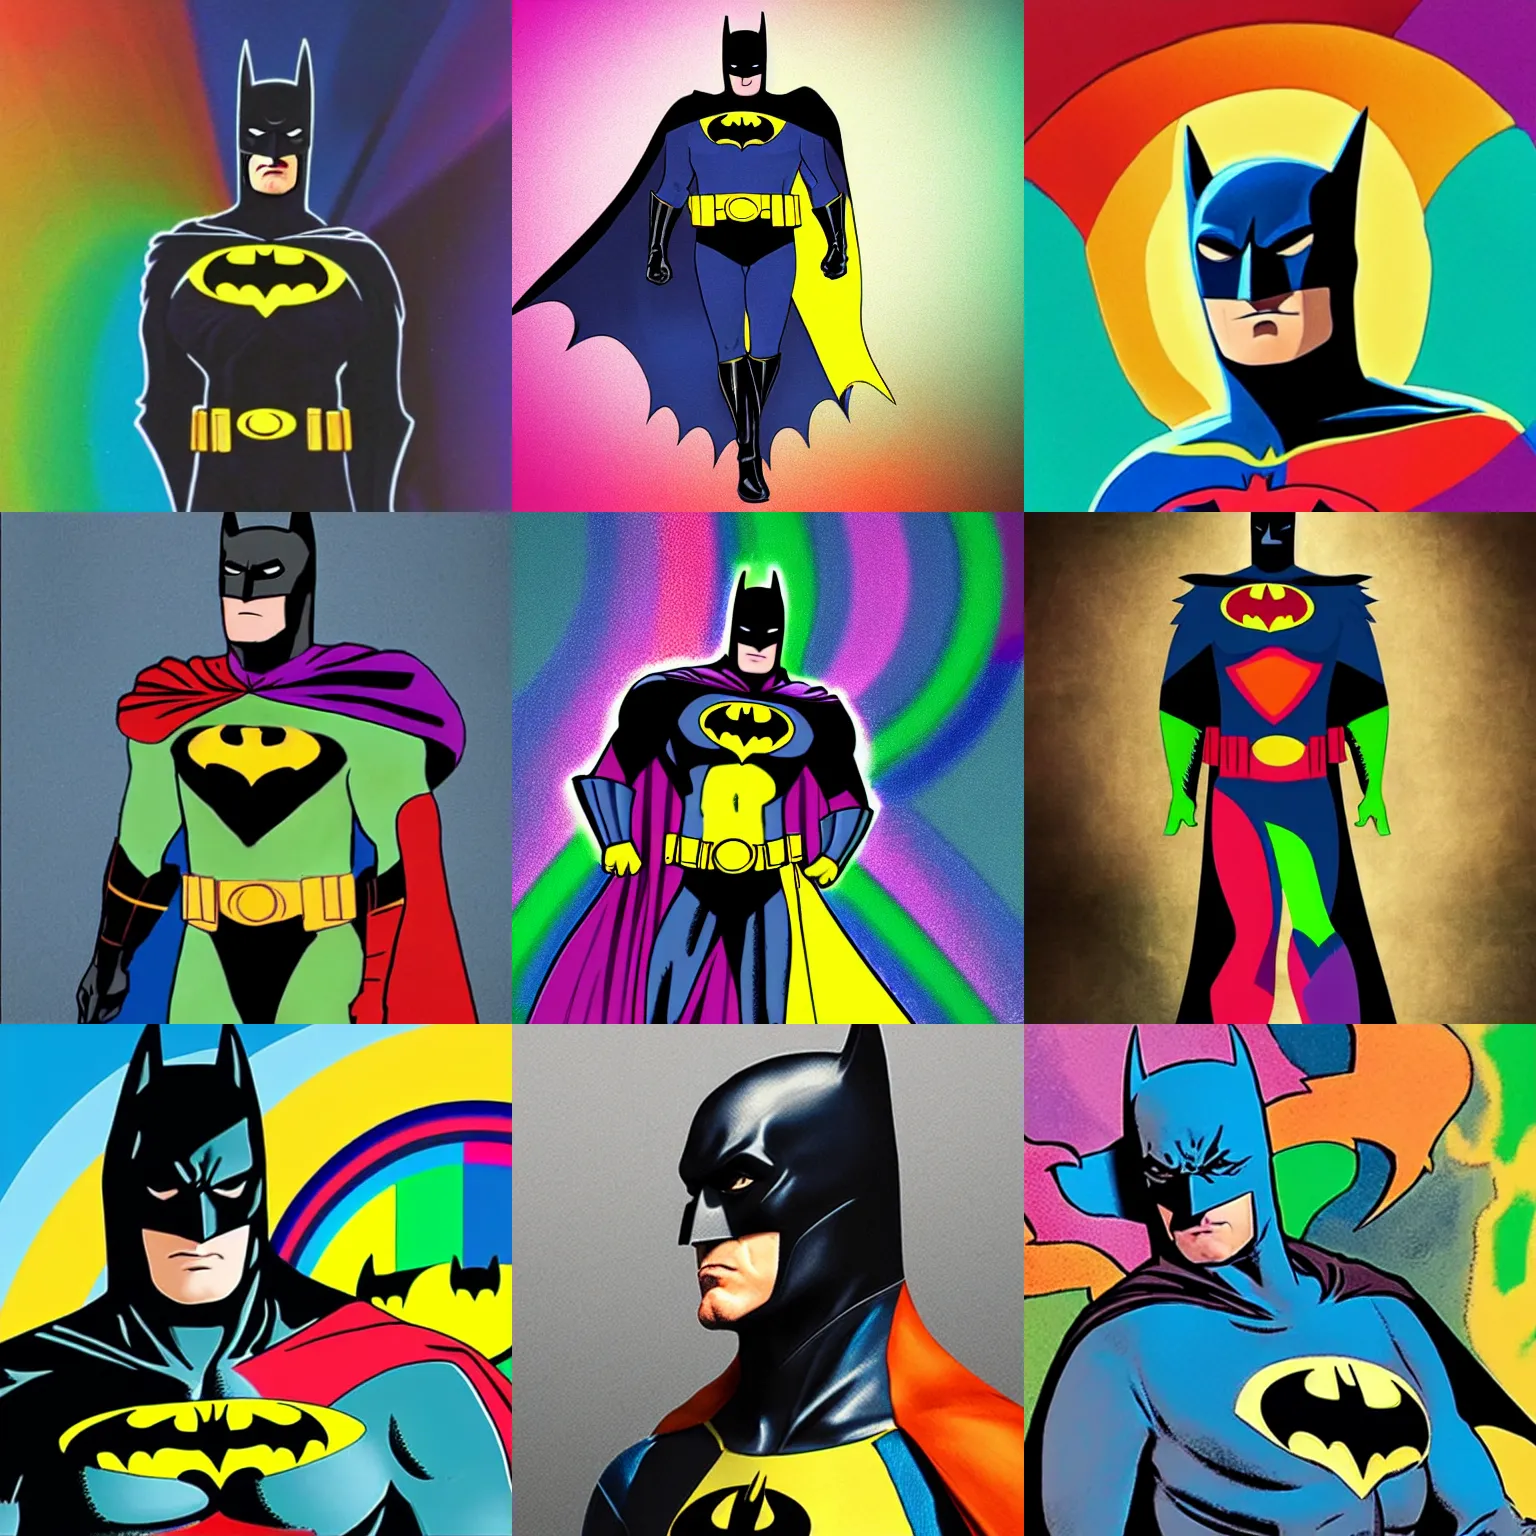 Prompt: batman wearing a new costume with rainbow colors